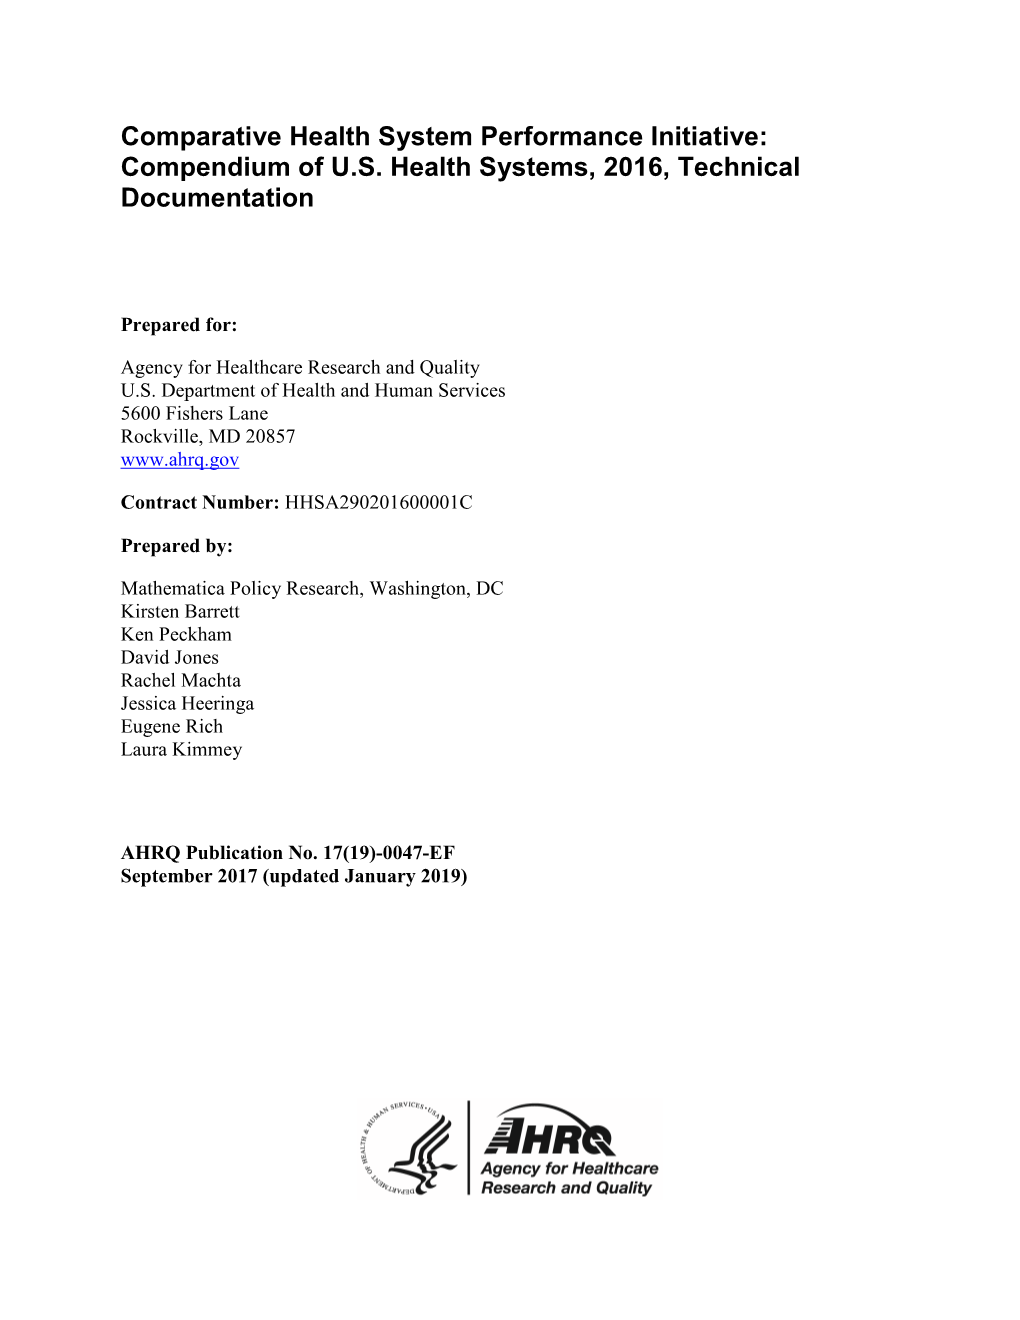 Comparative Health System Performance Initiative: Compendium of U.S. Health Systems, 2016, Technical Documentation